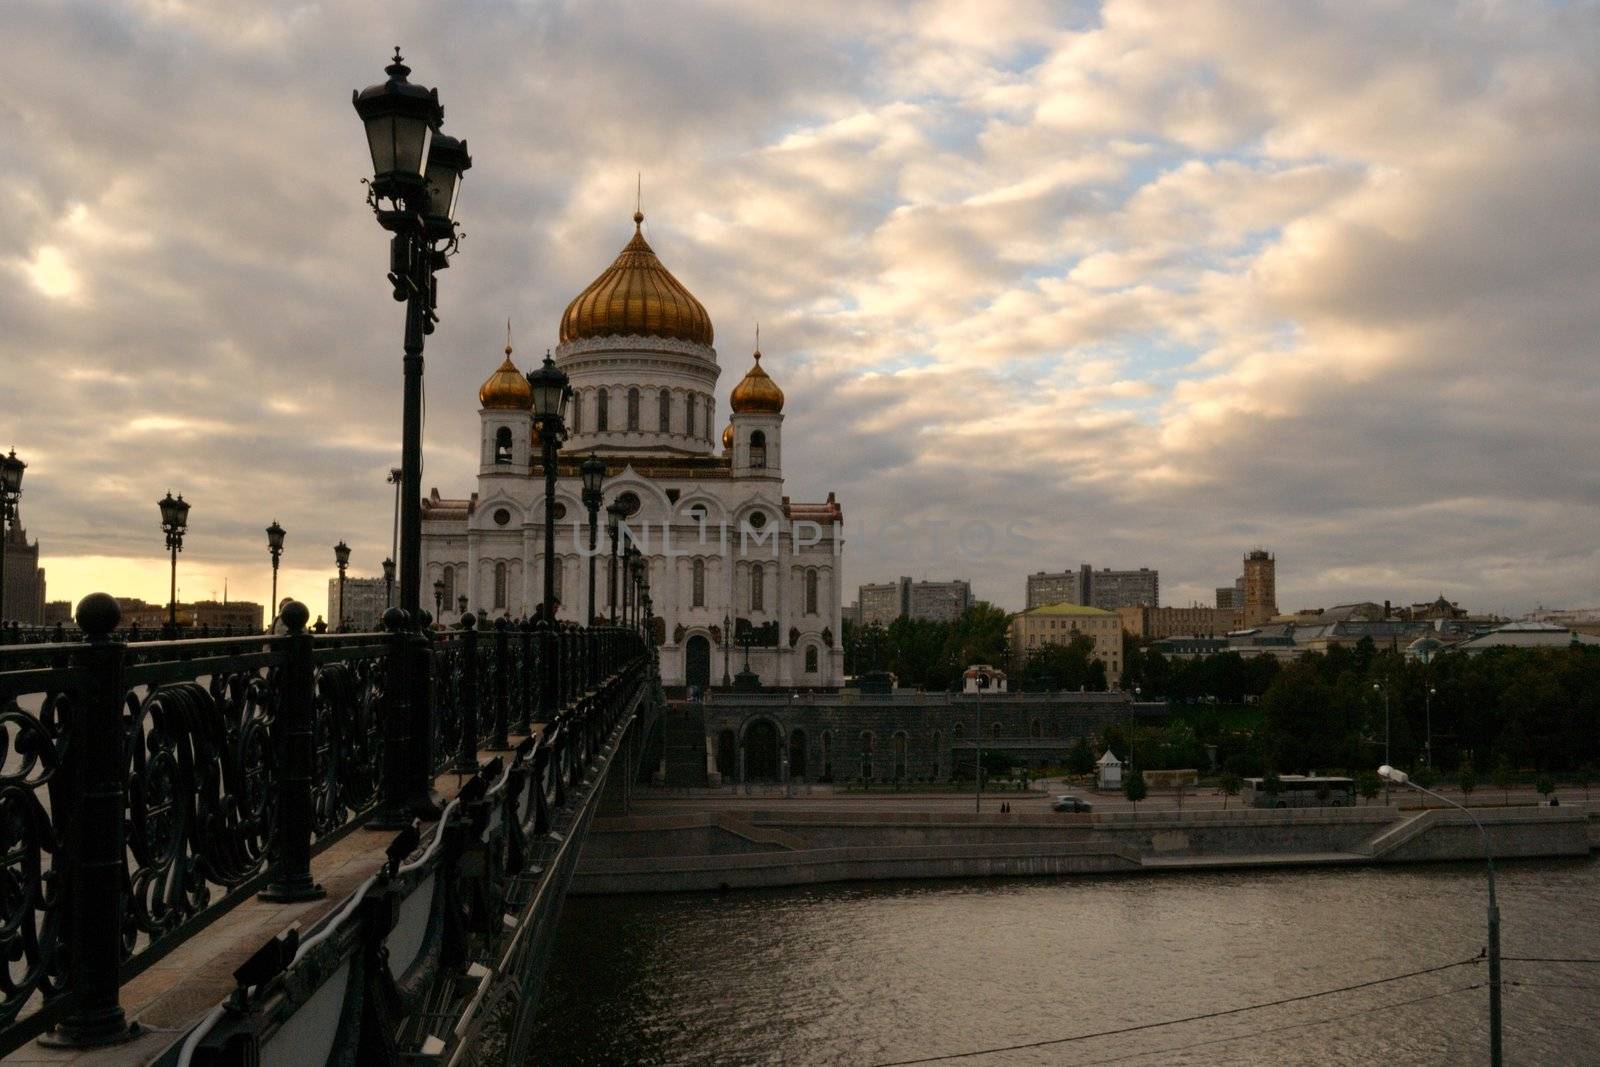 The view of the Cathedral of Christ the Saviour in Moscow